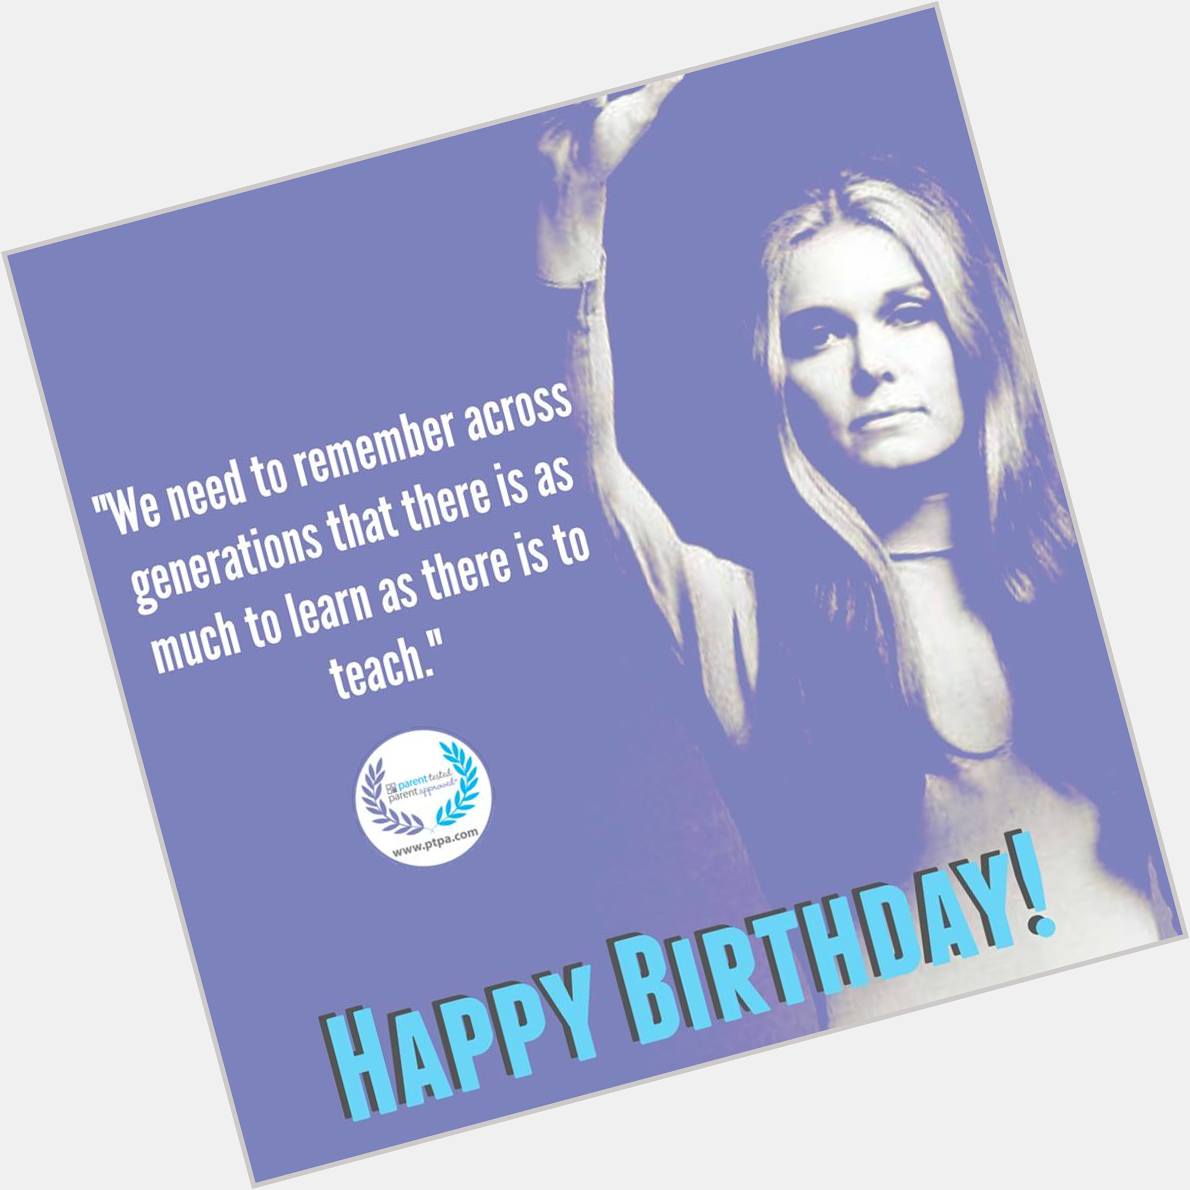 Happy Birthday Gloria Steinem! You are an inspiration to millions everywhere. 